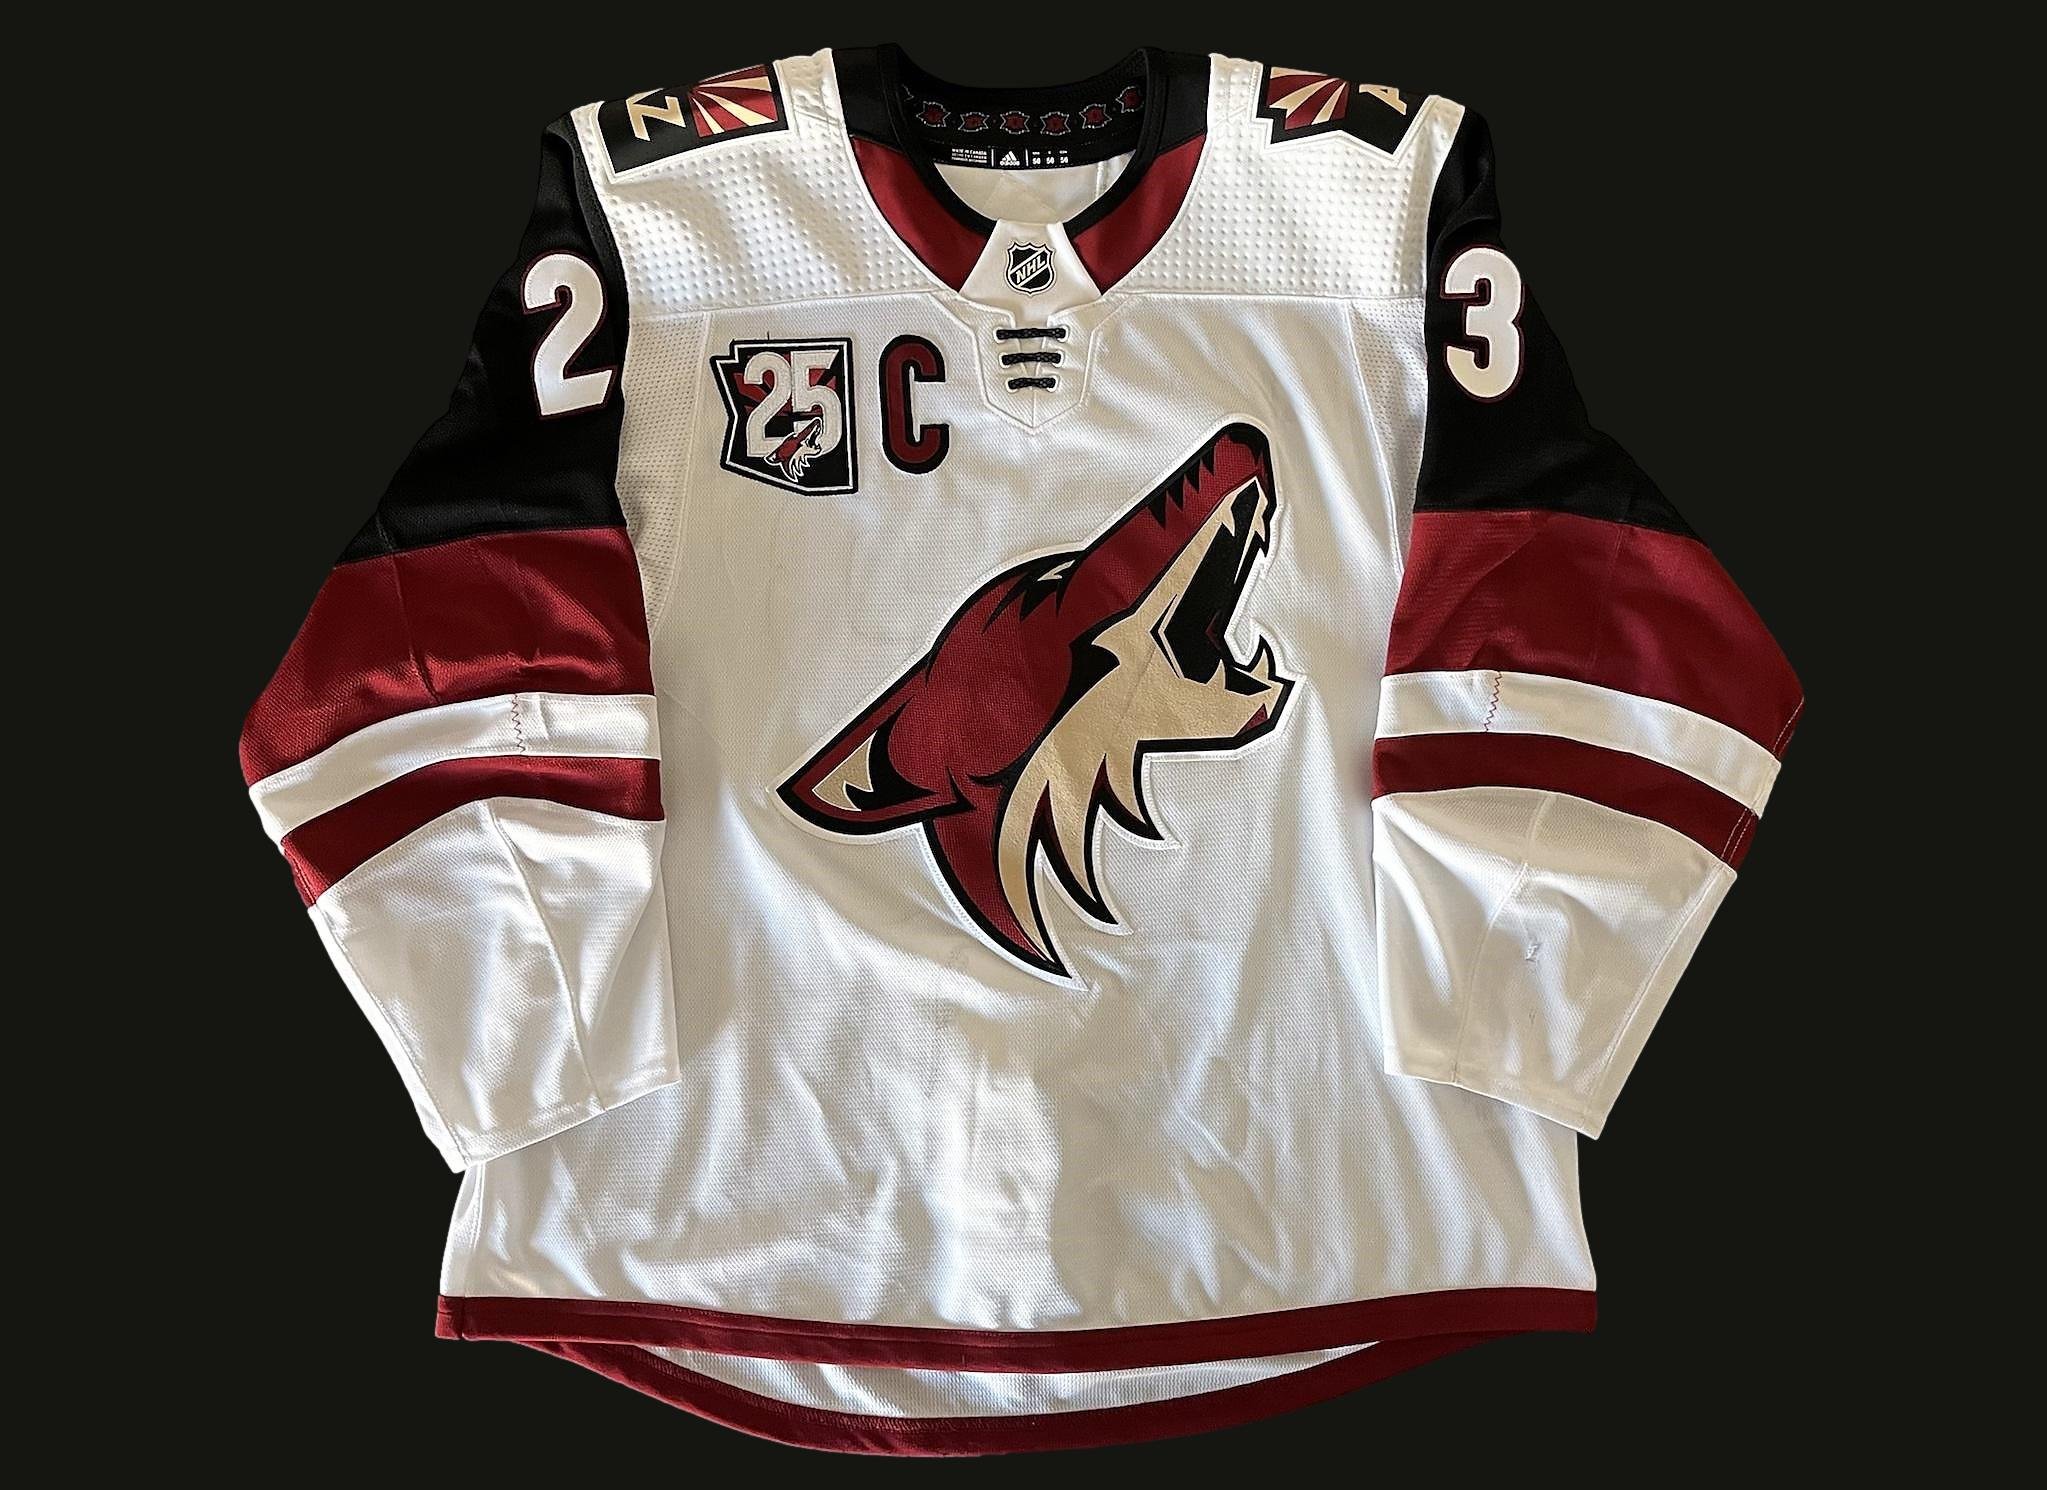 Coyotes reveal jersey that hearkens back to 1999-2003 seasons